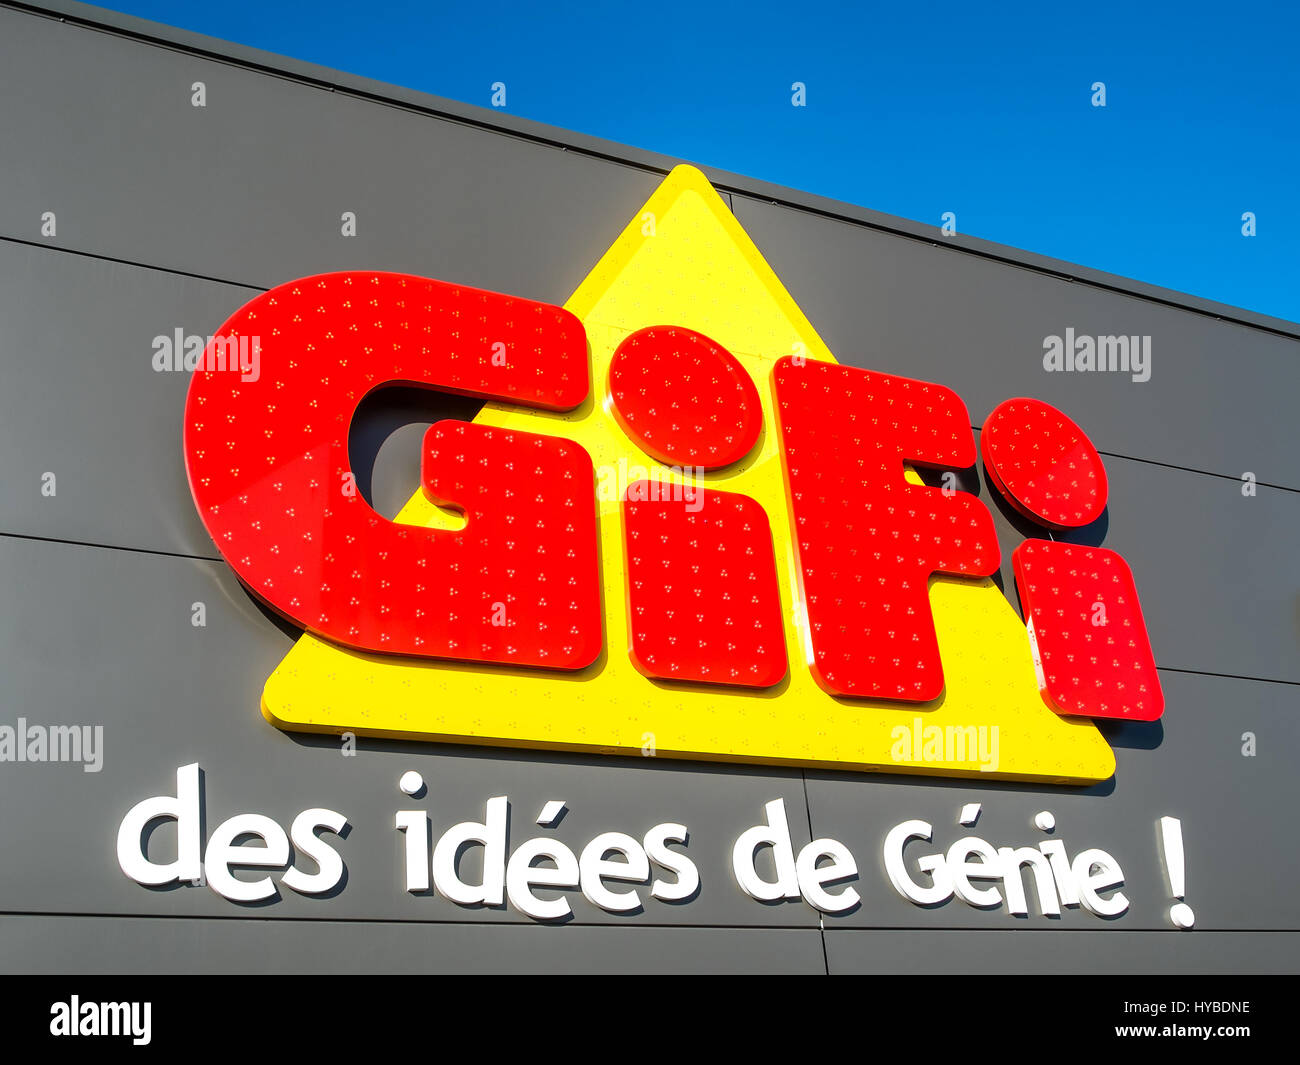 Gifi store sign, France. Stock Photo